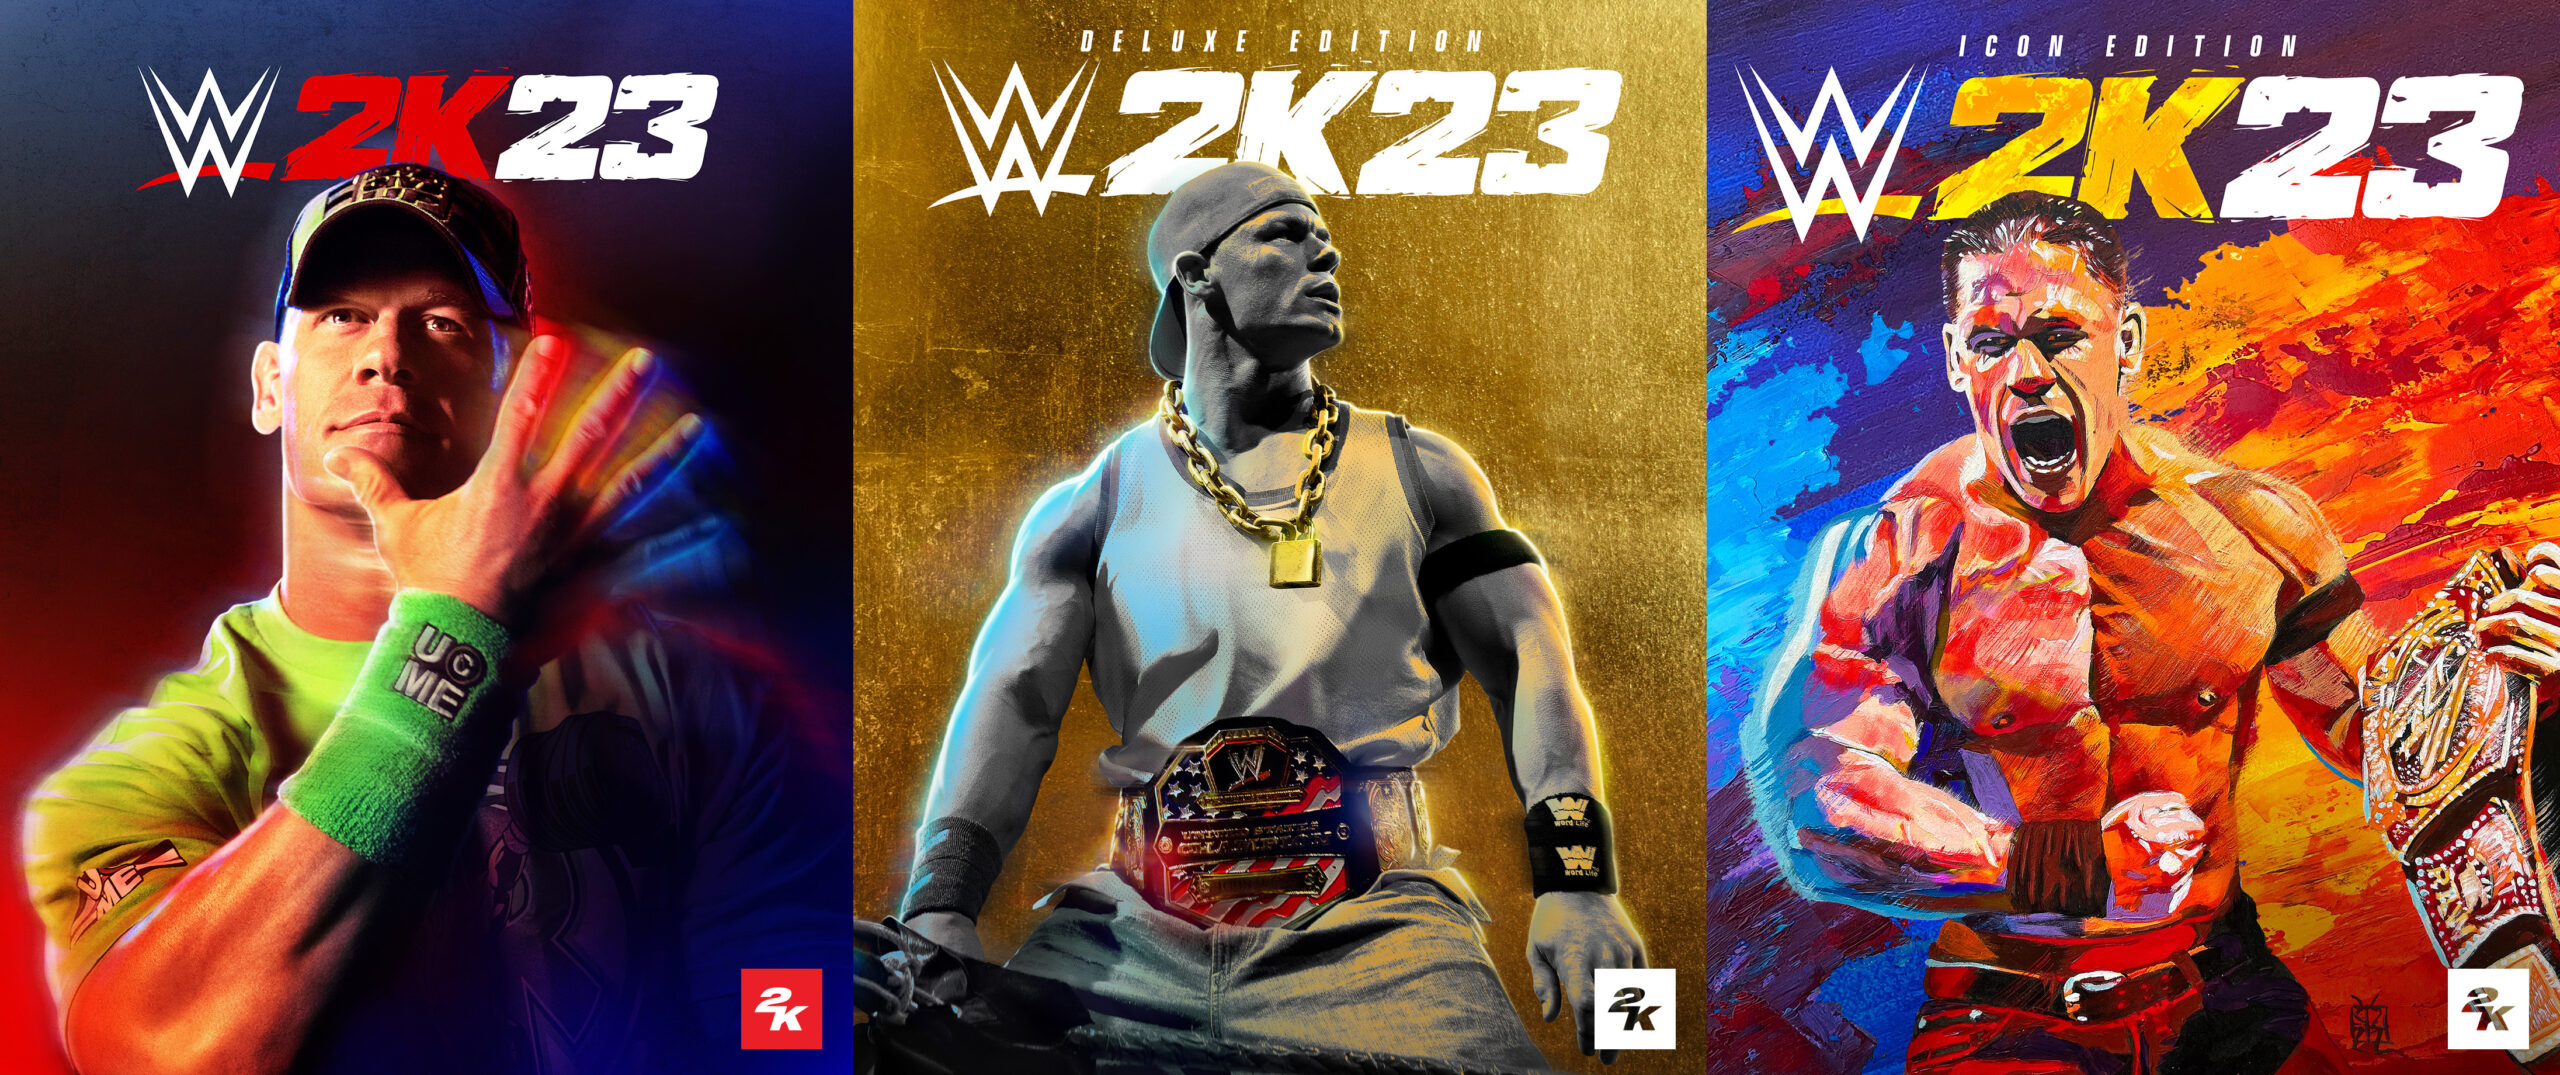 wwe2k23-is-available-now-cover